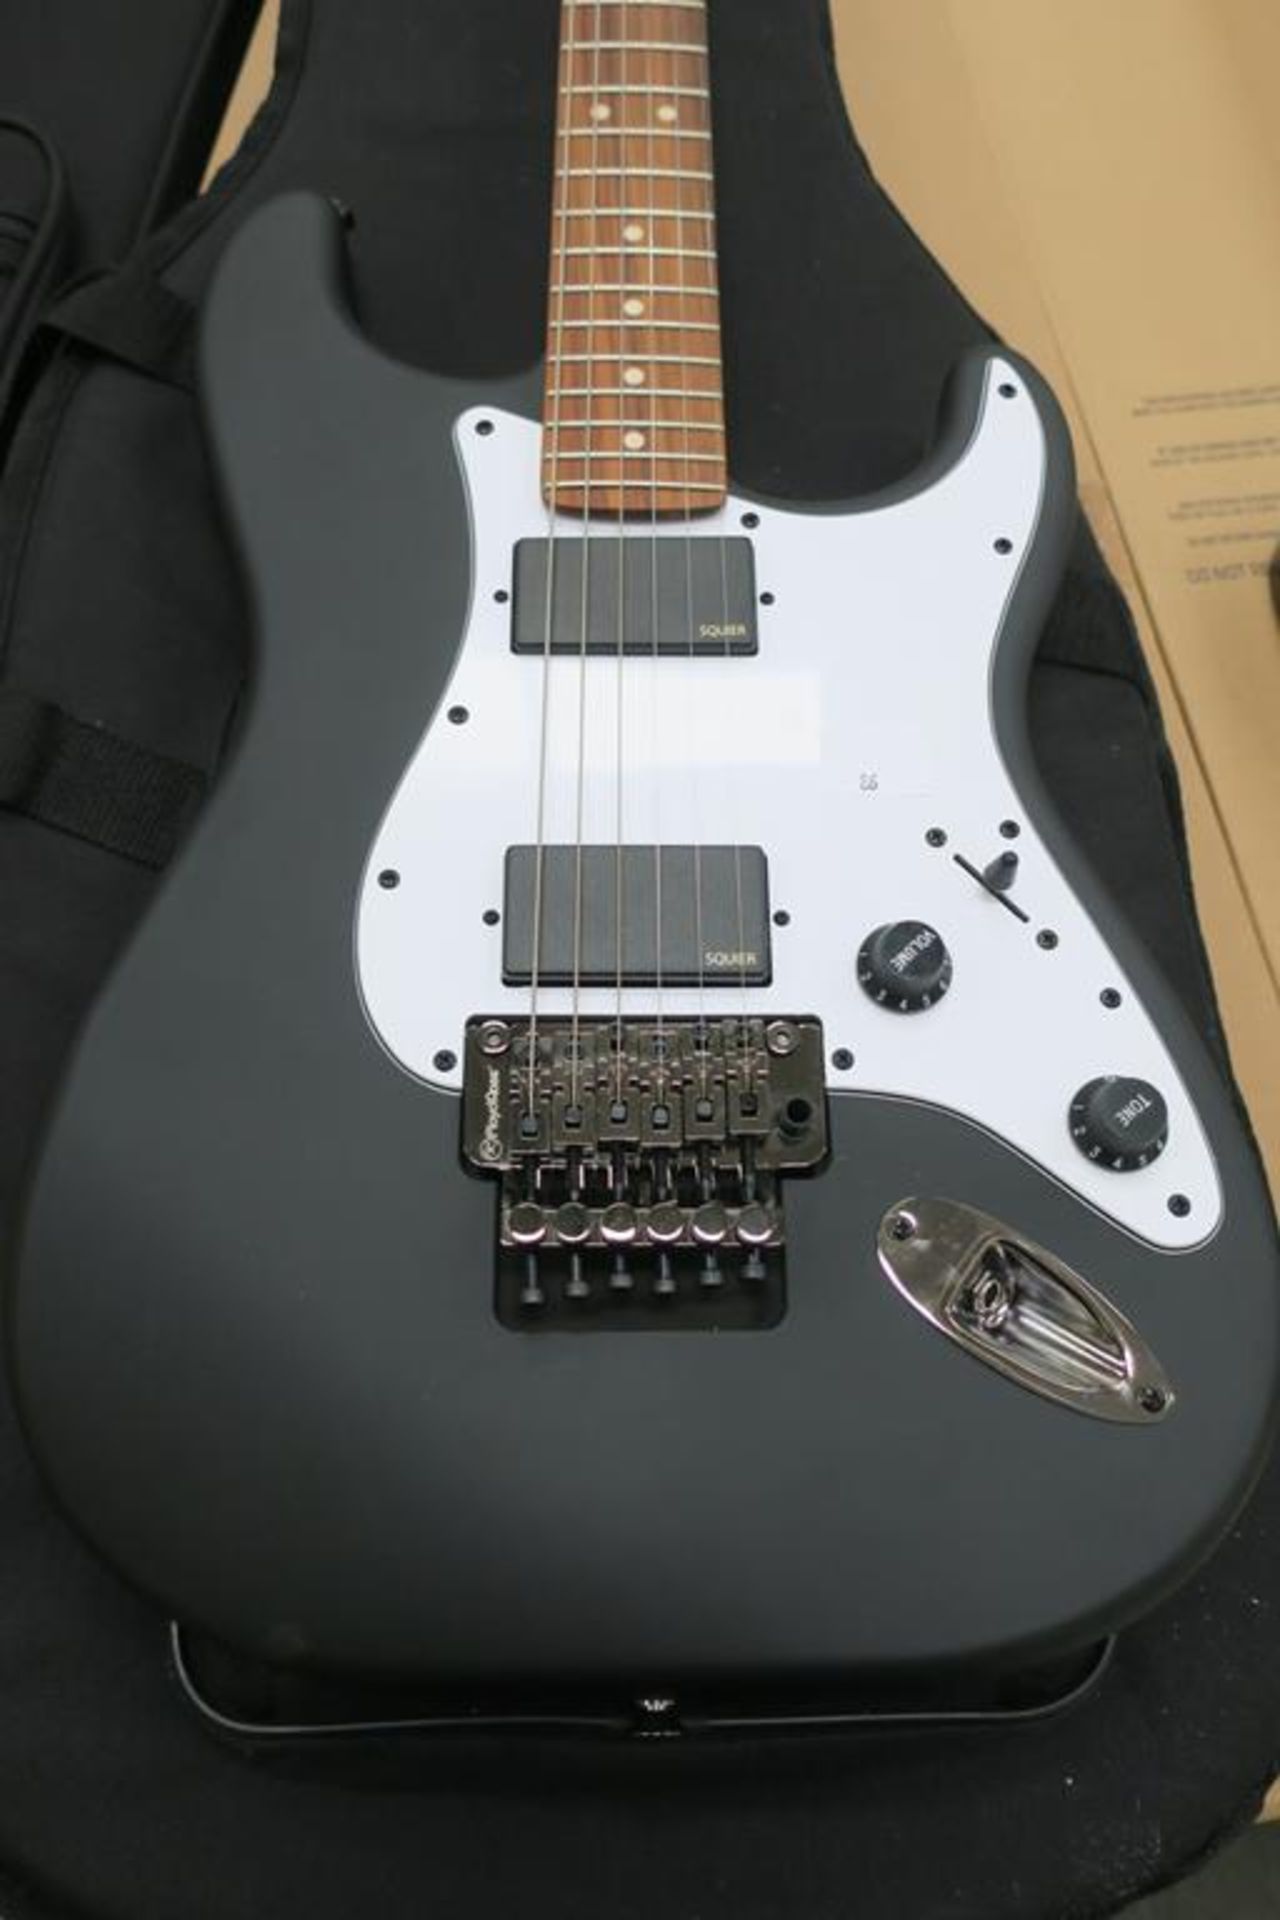 Squier Contempary Statocaster - Image 2 of 6